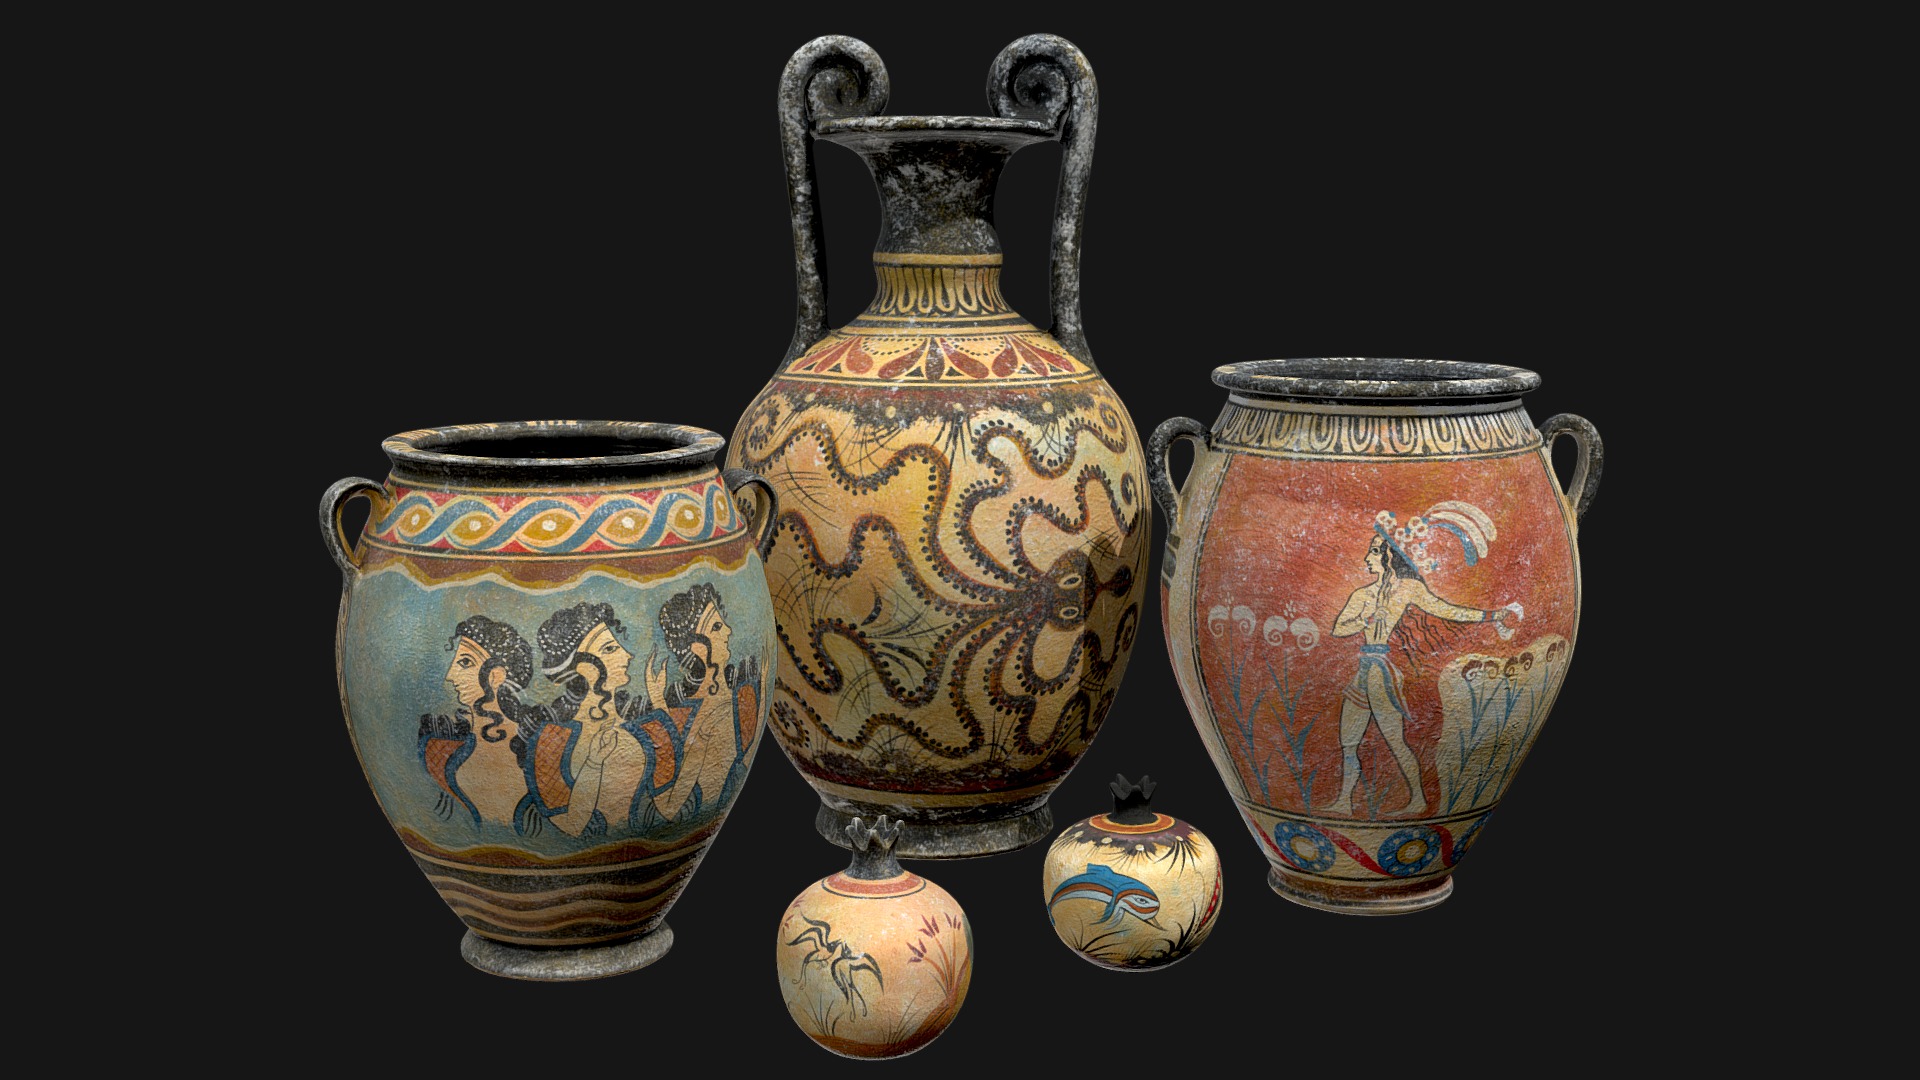 A case study in studio photogrammetry and digital reconstruction, using replicas by Crete based potters, &ldquo;Knossos Art